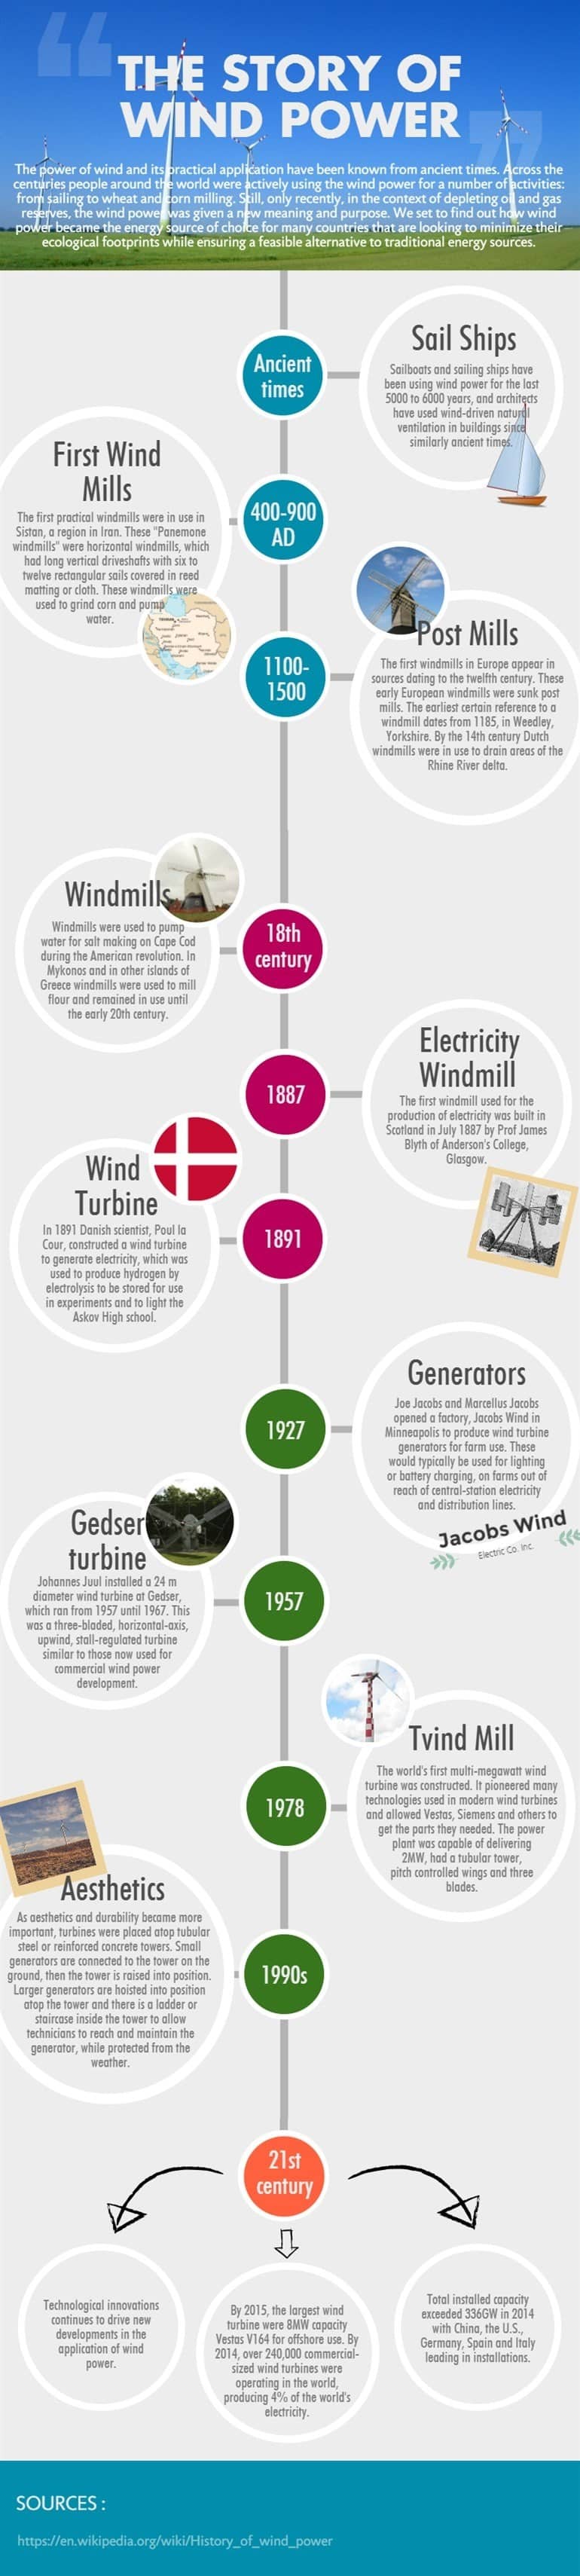 The Story of Wind Power Infographic